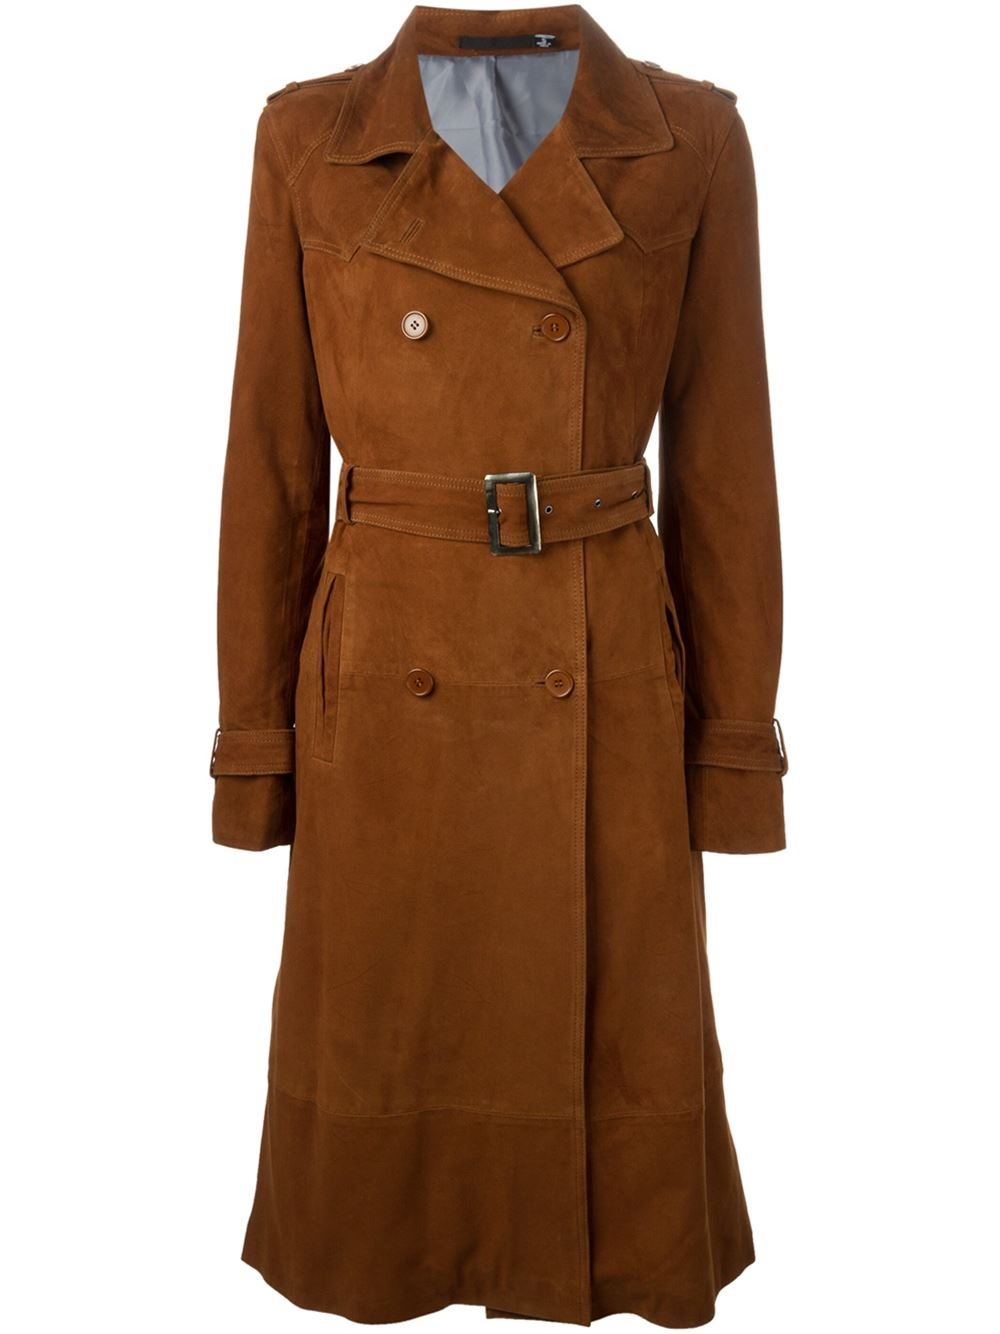 Lyst - BLK DNM Belted Flared Coat in Brown